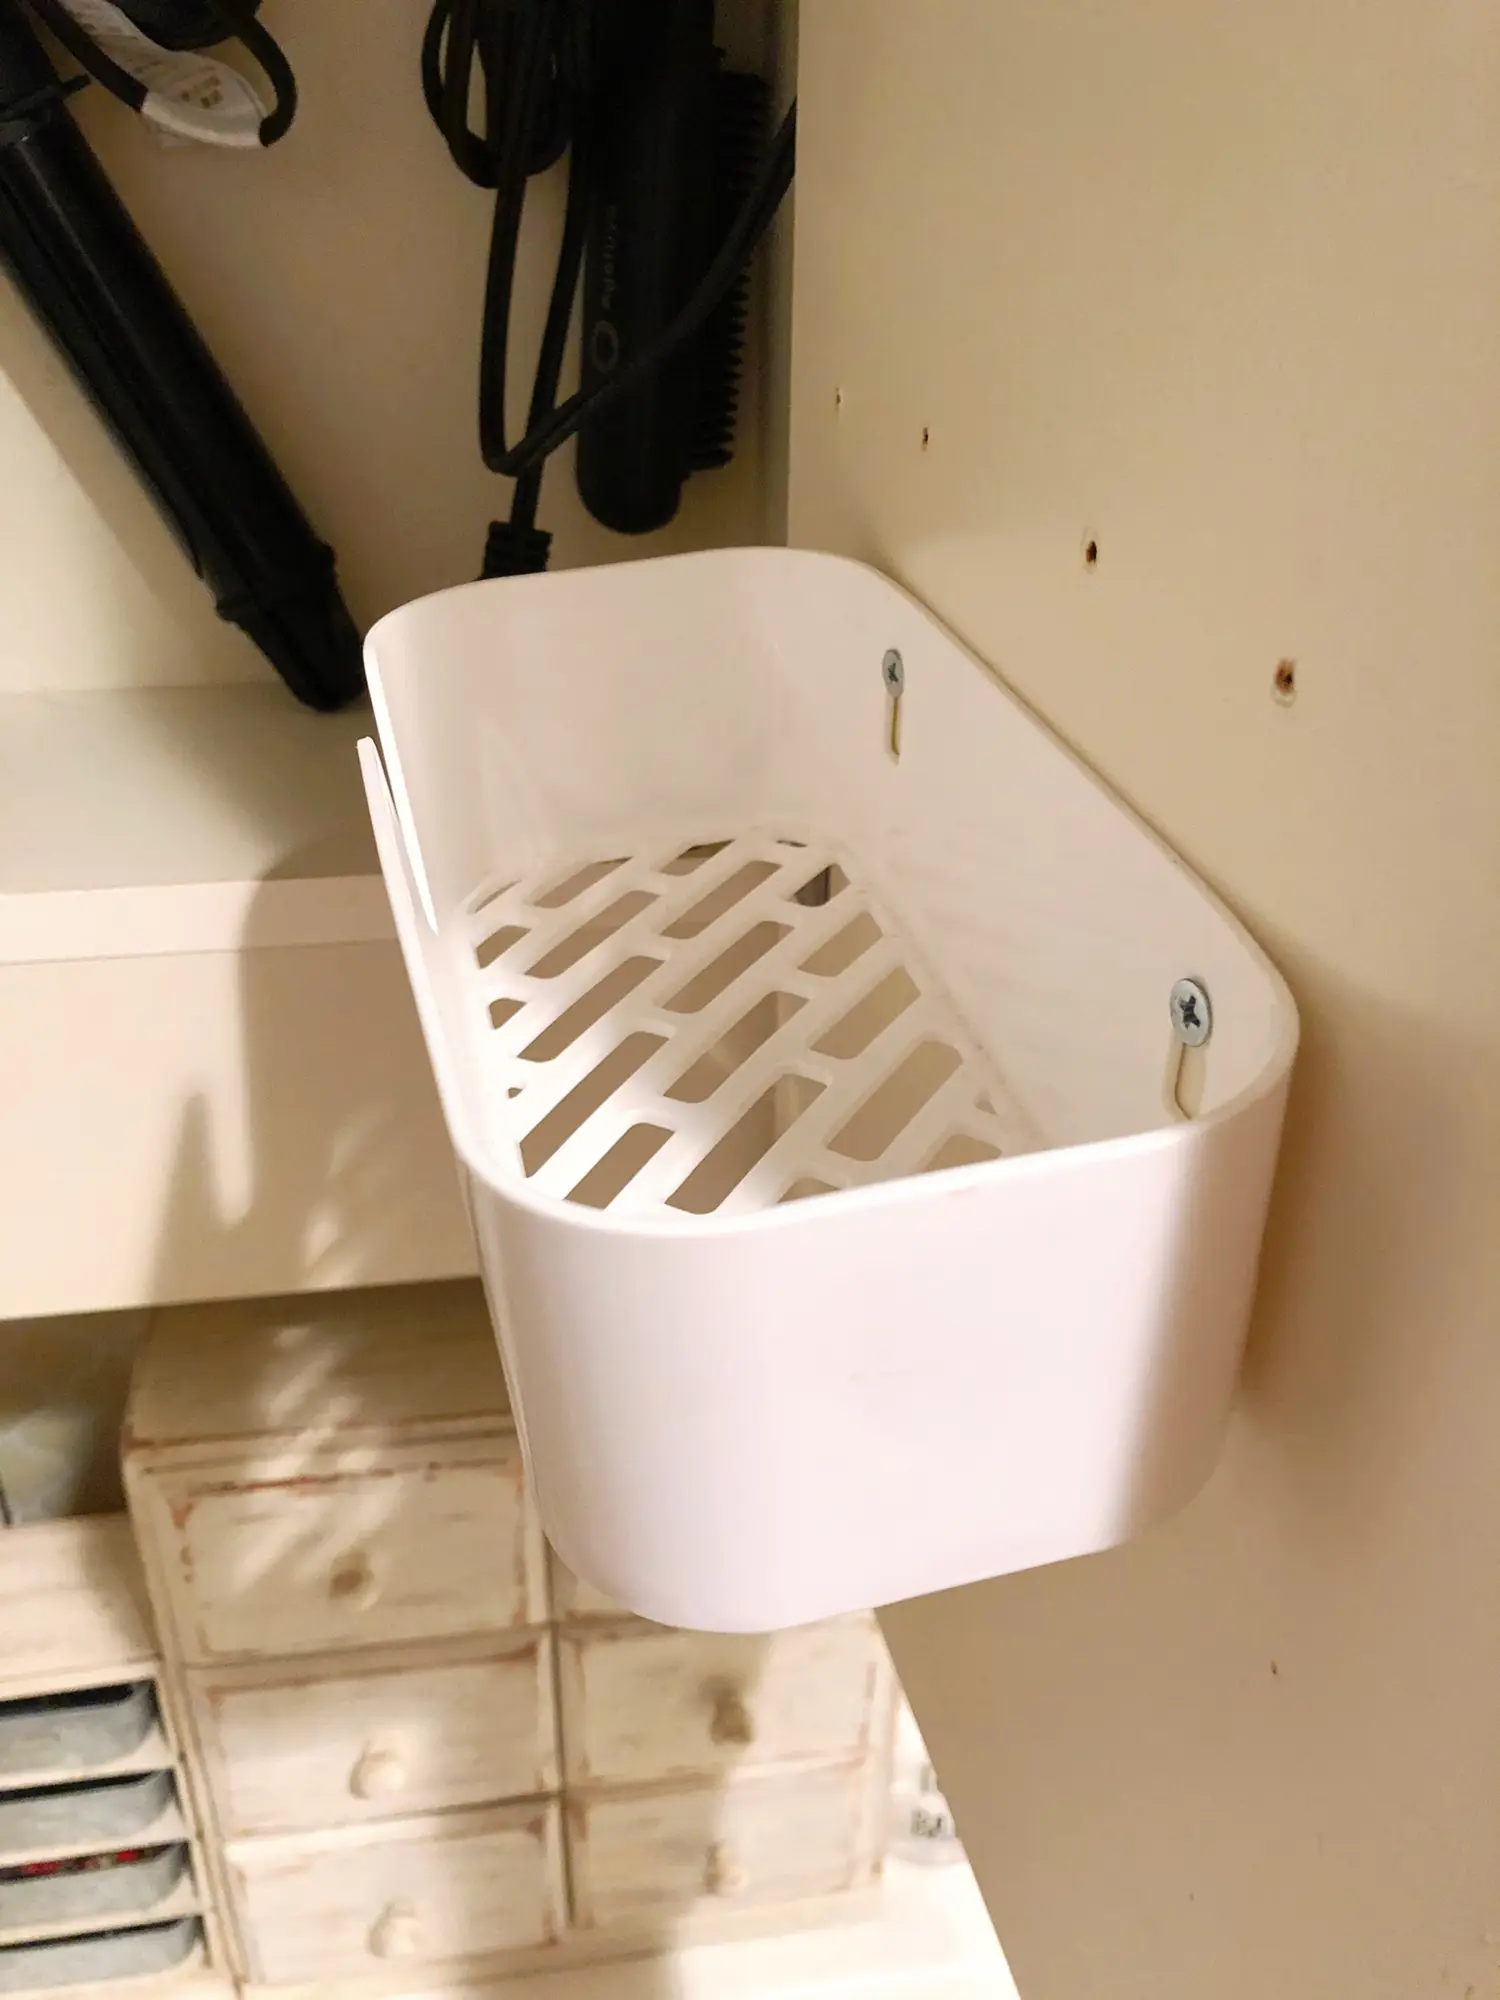 TISKEN Corner basket with suction cup, white - IKEA